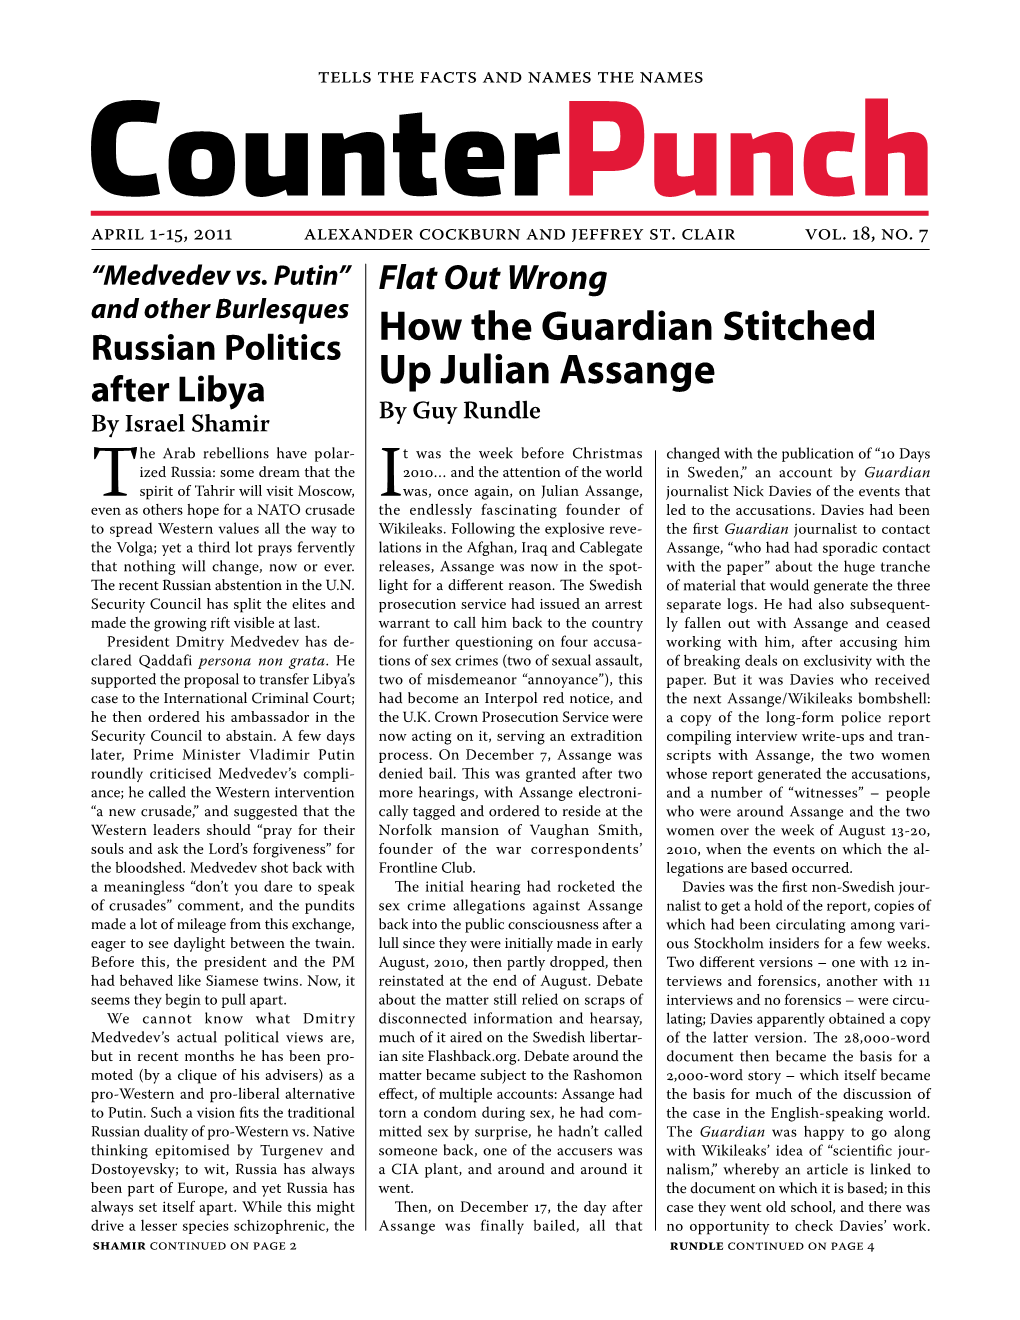 How the Guardian Stitched up Julian Assange